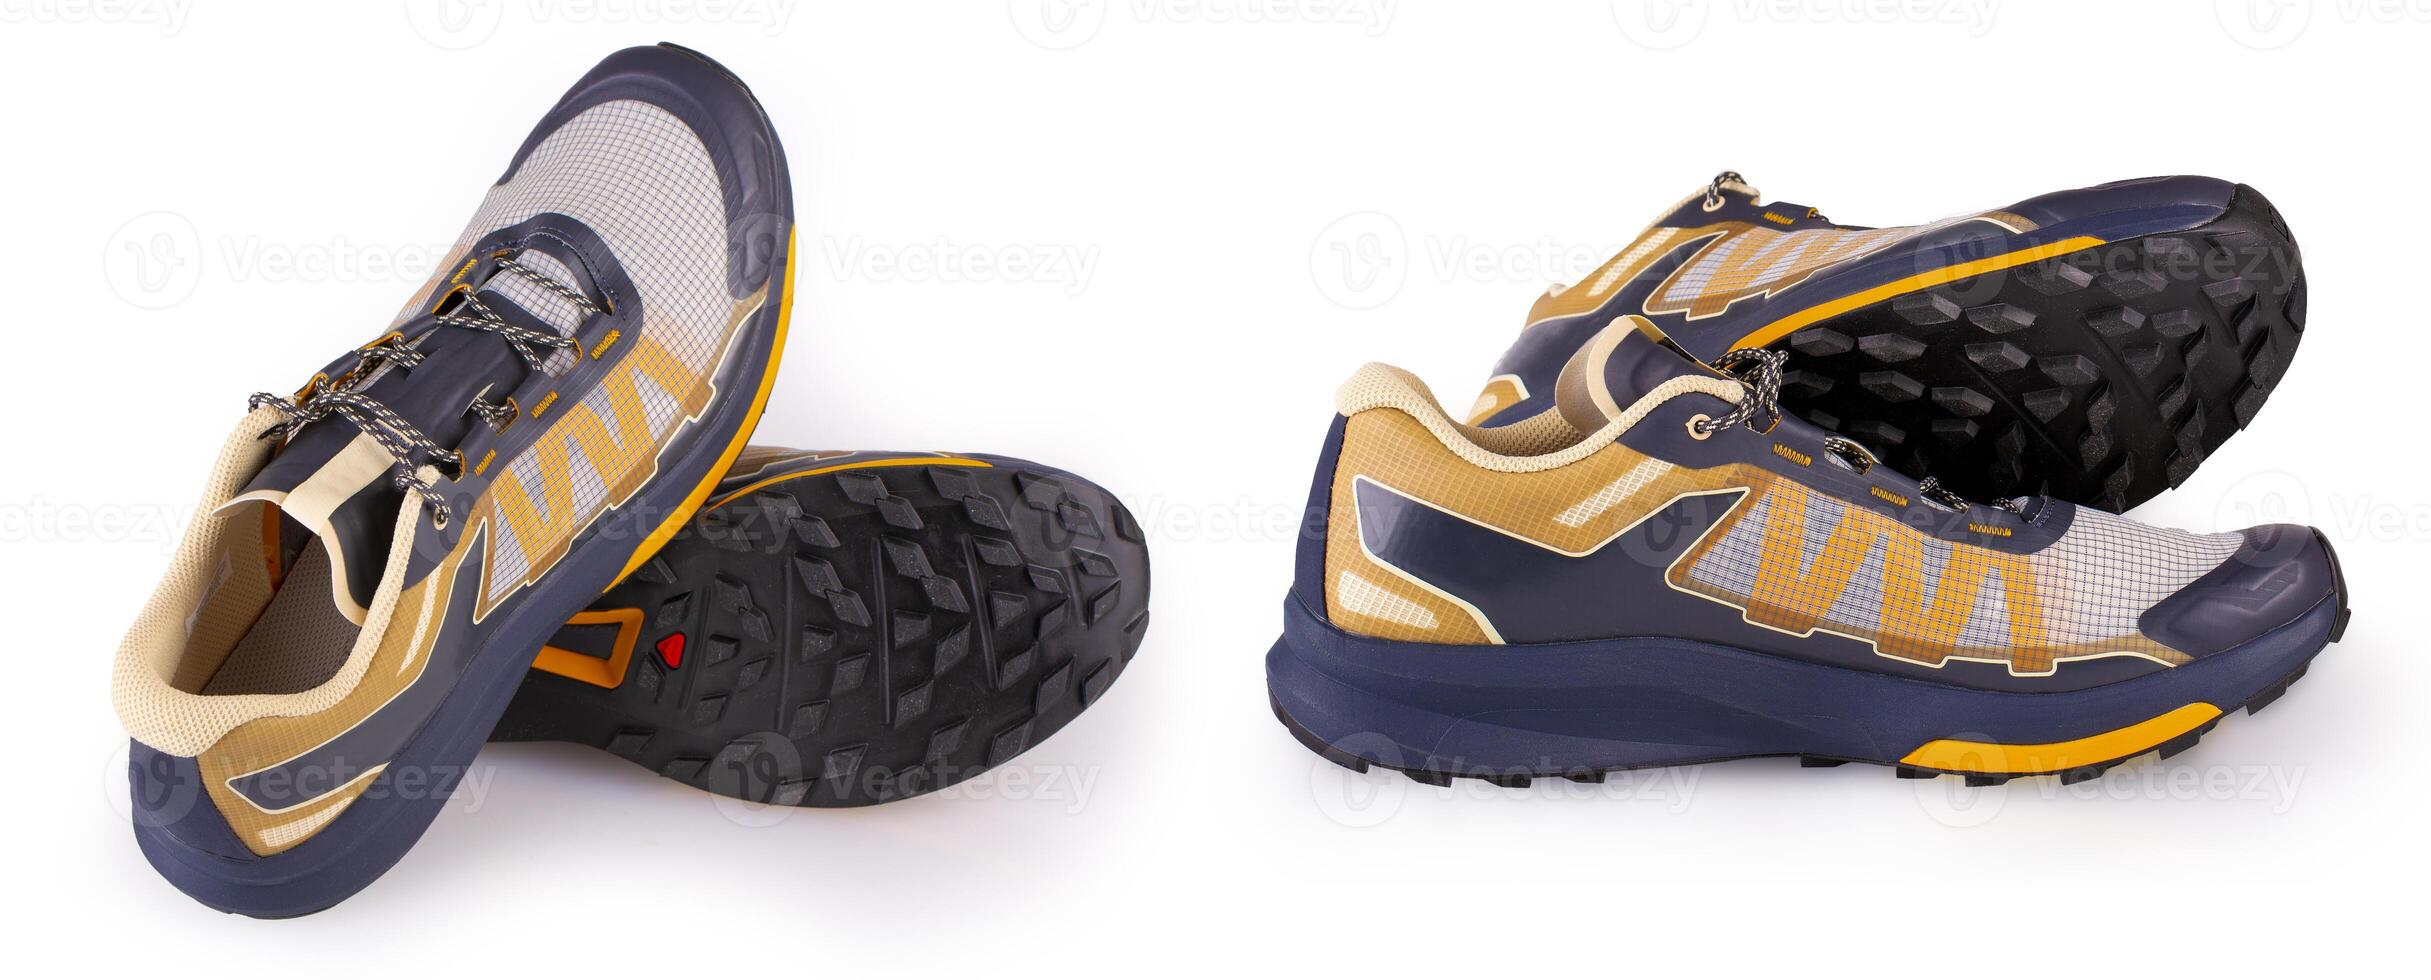 The Set of Outdoors shoes for man for different activities, trail running, free running, fast climbing, hiking, studio shoot on white background photo